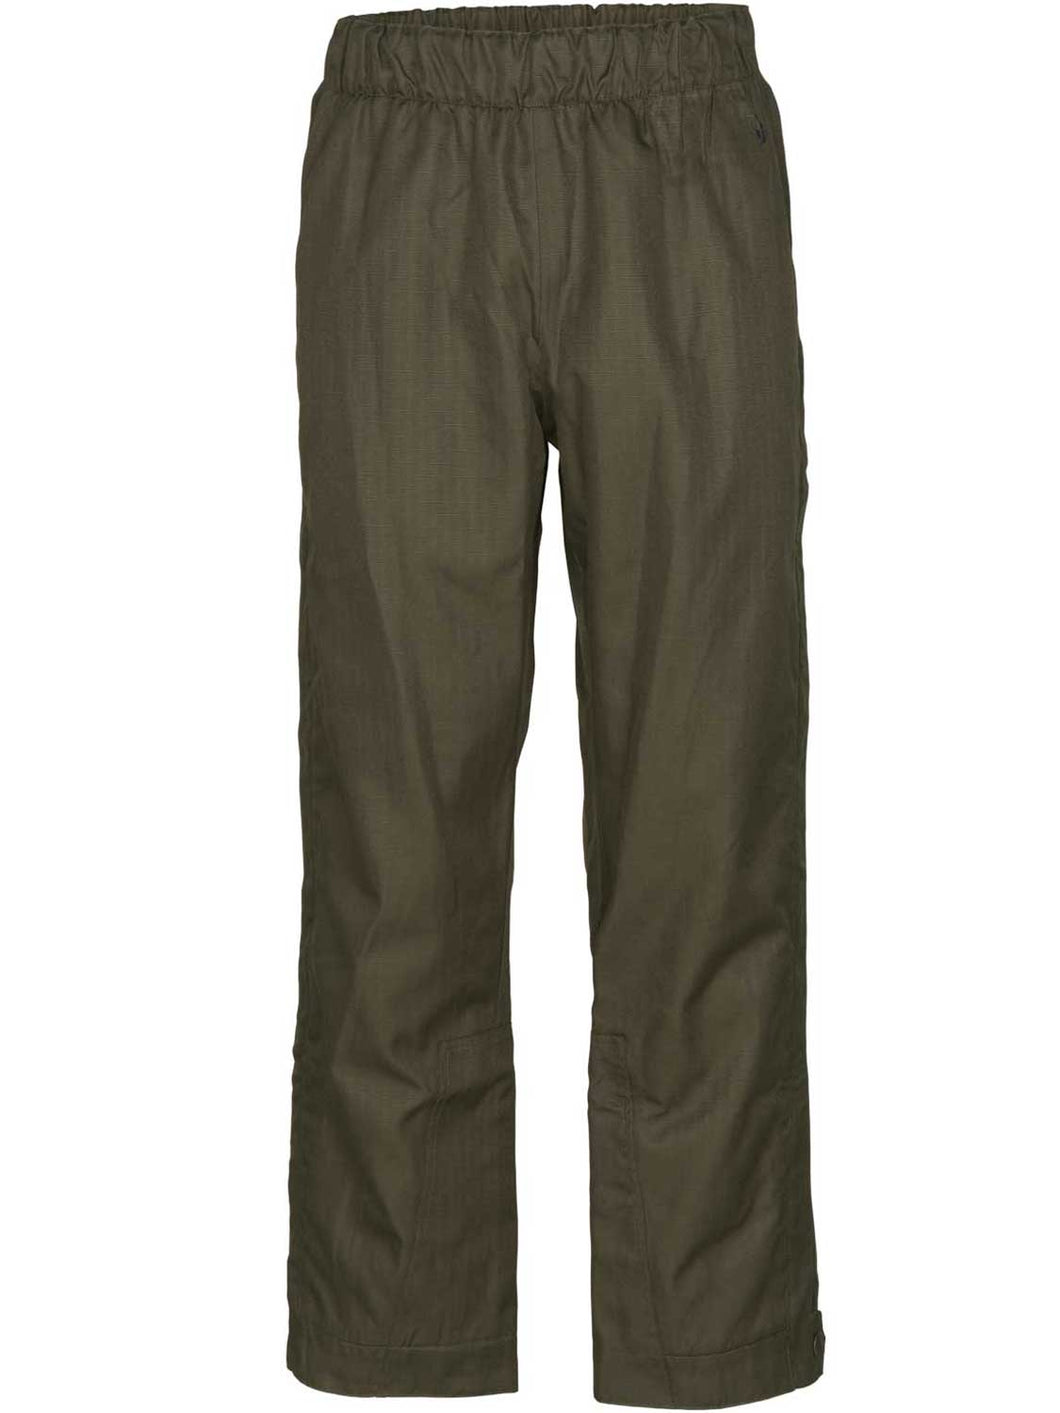 SEELAND Trousers - Mens Buckthorn Overtrousers - Shaded Olive